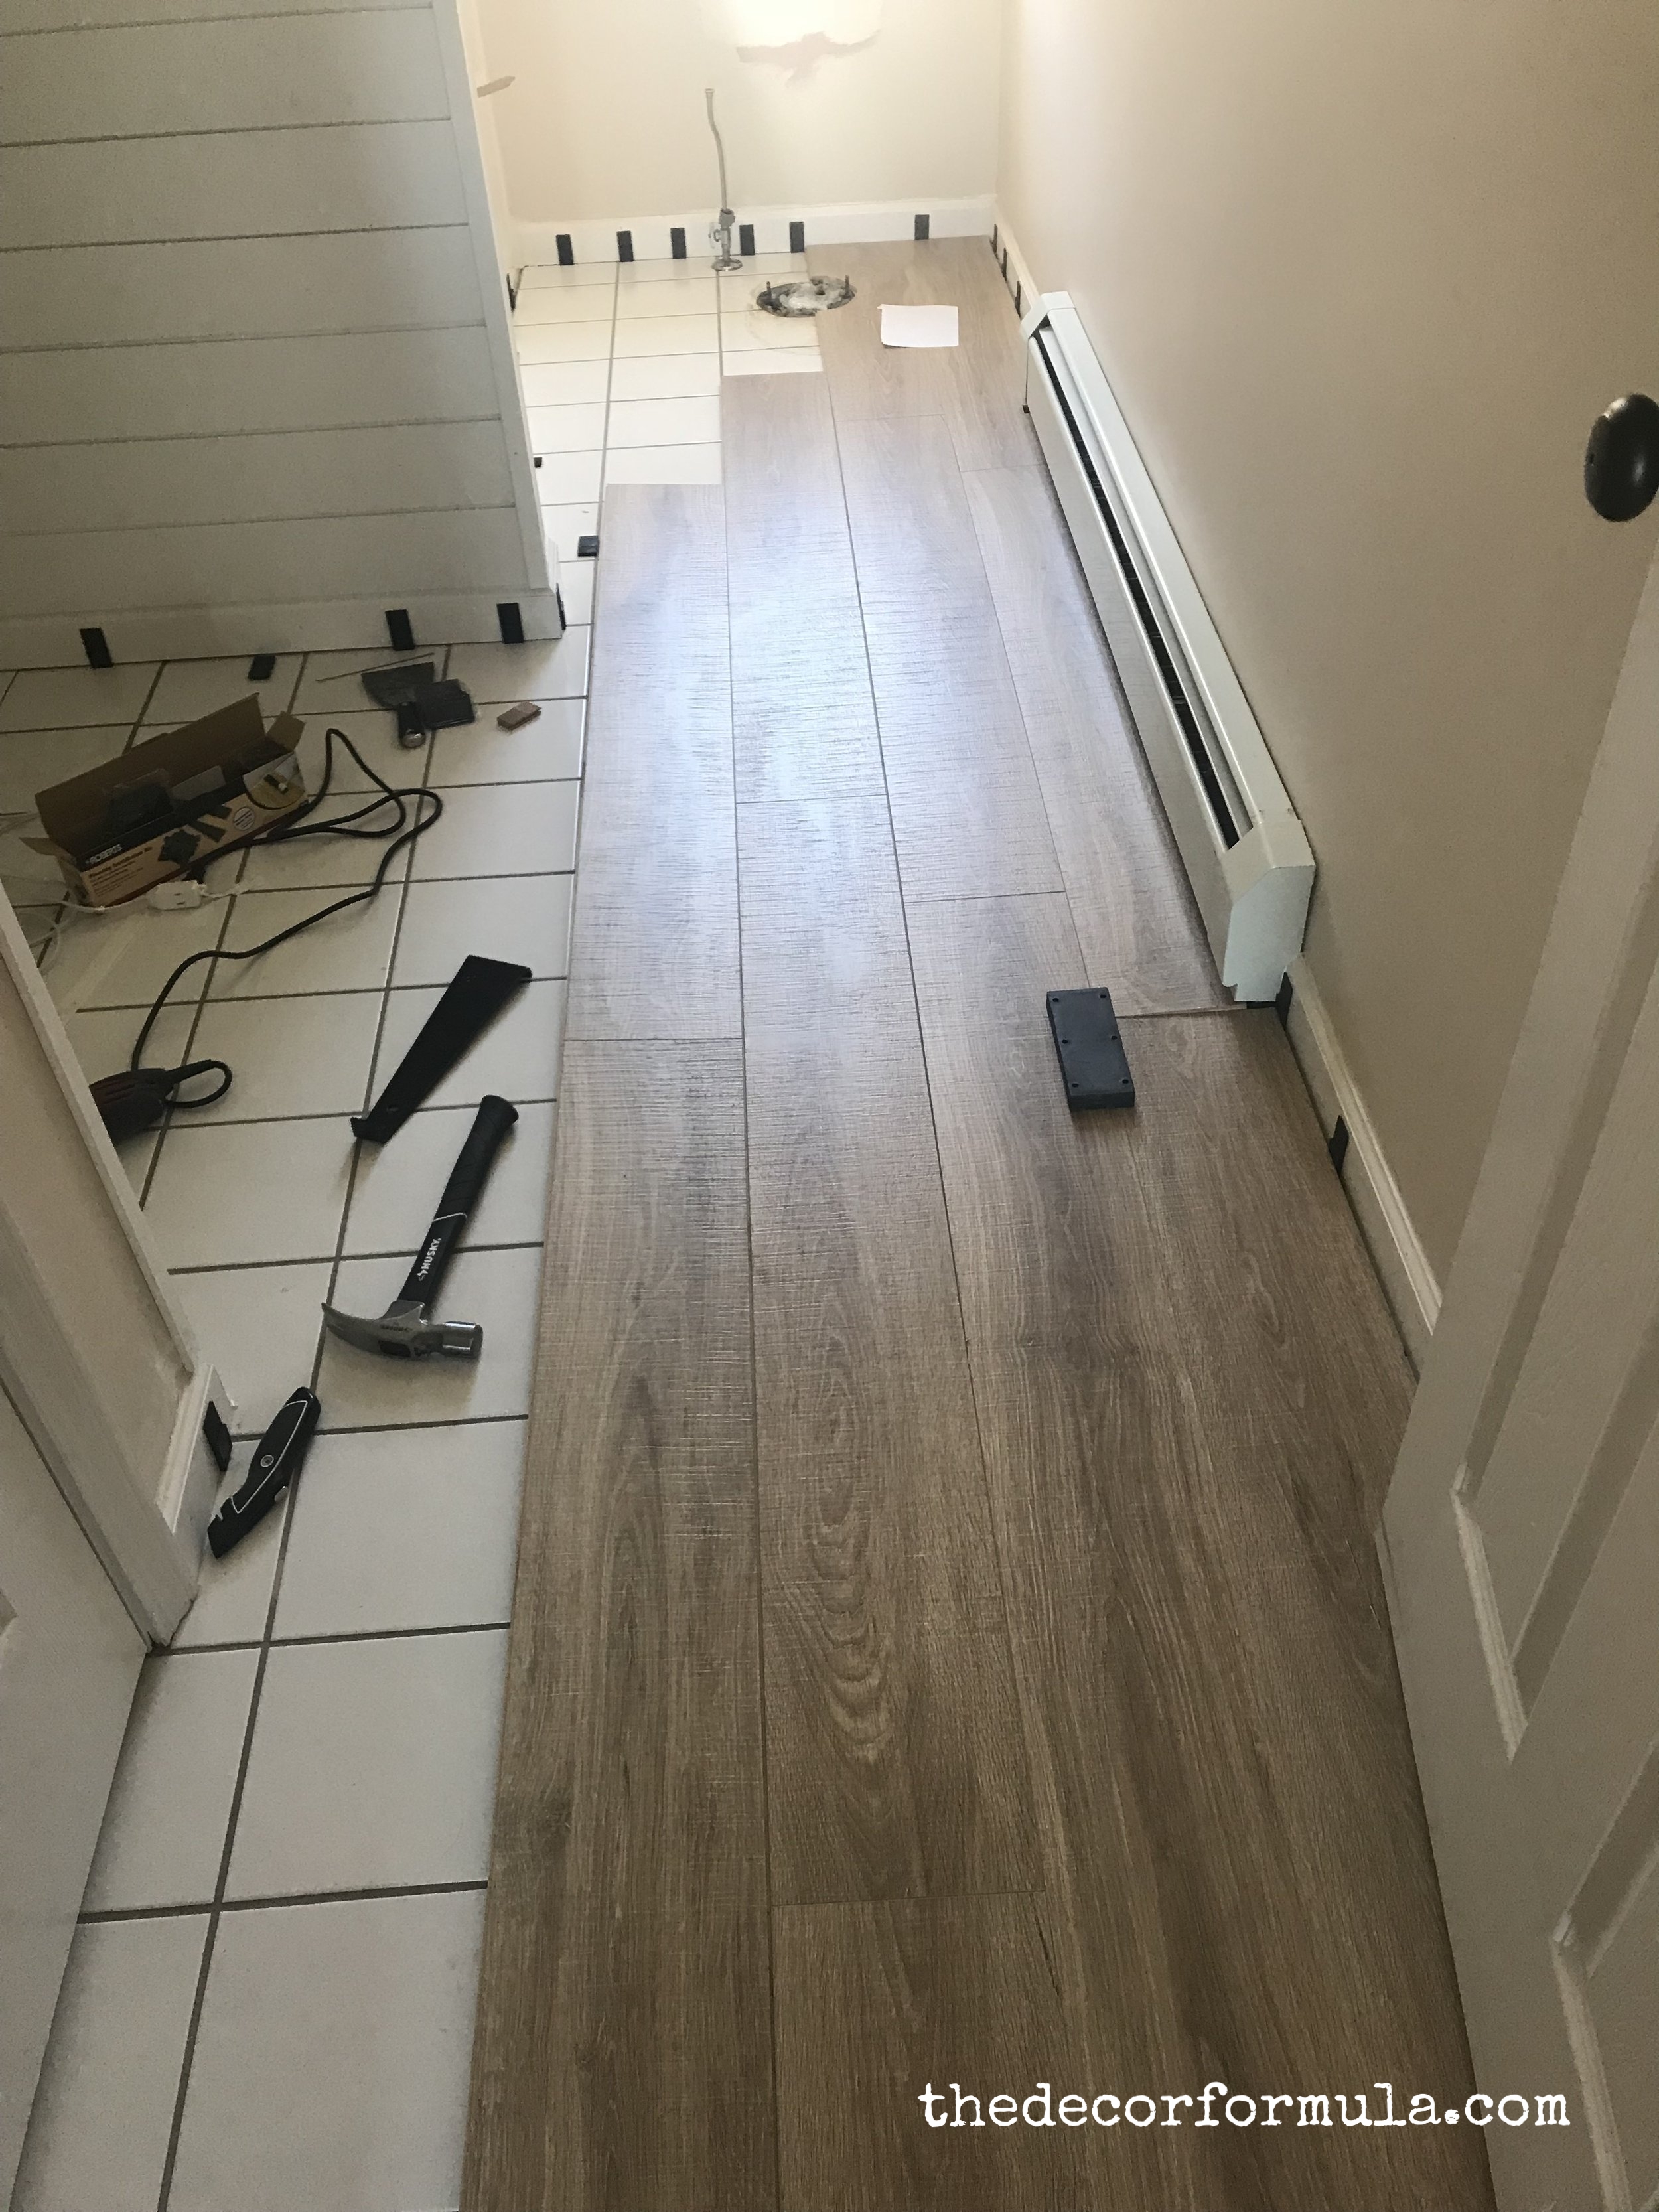 Ideas For Covering Up Tile Floors, Can We Put Laminate Flooring Over Tile